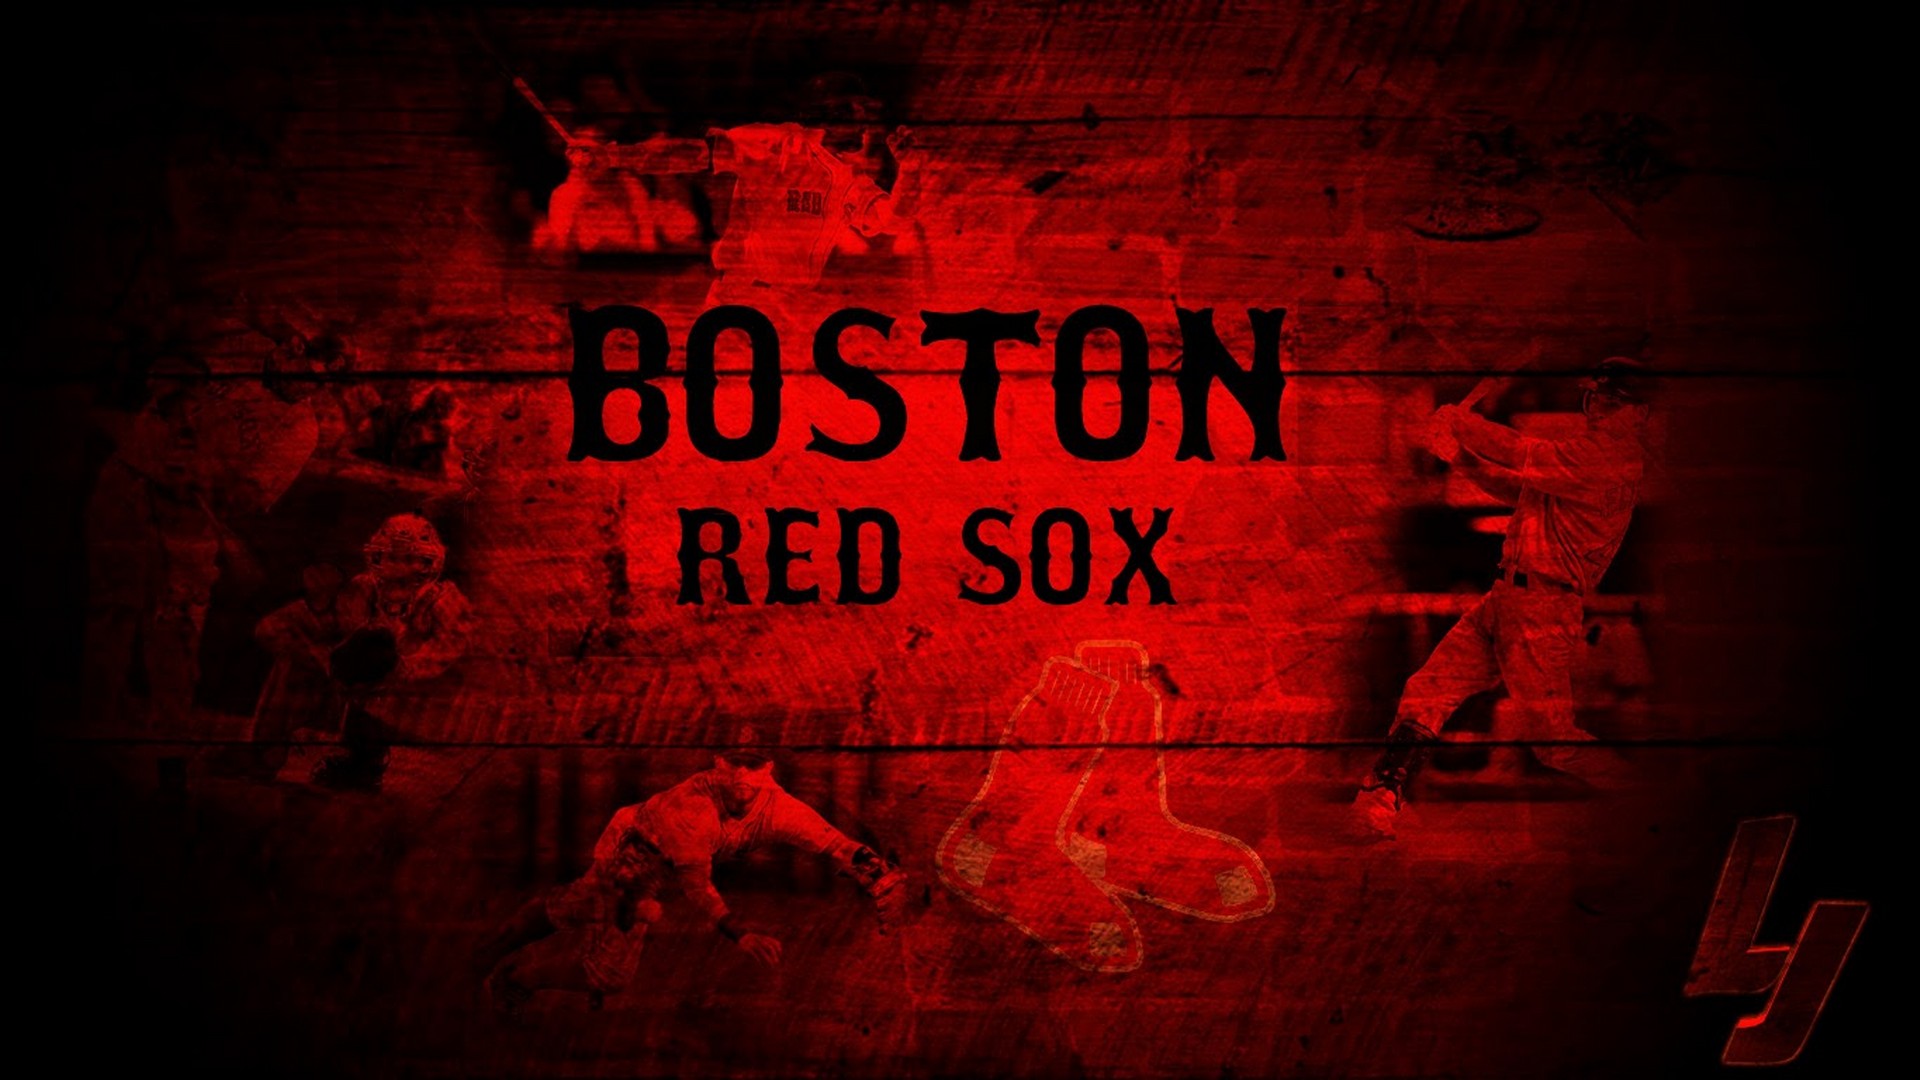 Boston Red Sox For Desktop Wallpaper with high-resolution 1920x1080 pixel. You can use this wallpaper for Mac Desktop Wallpaper, Laptop Screensavers, Android Wallpapers, Tablet or iPhone Home Screen and another mobile phone device